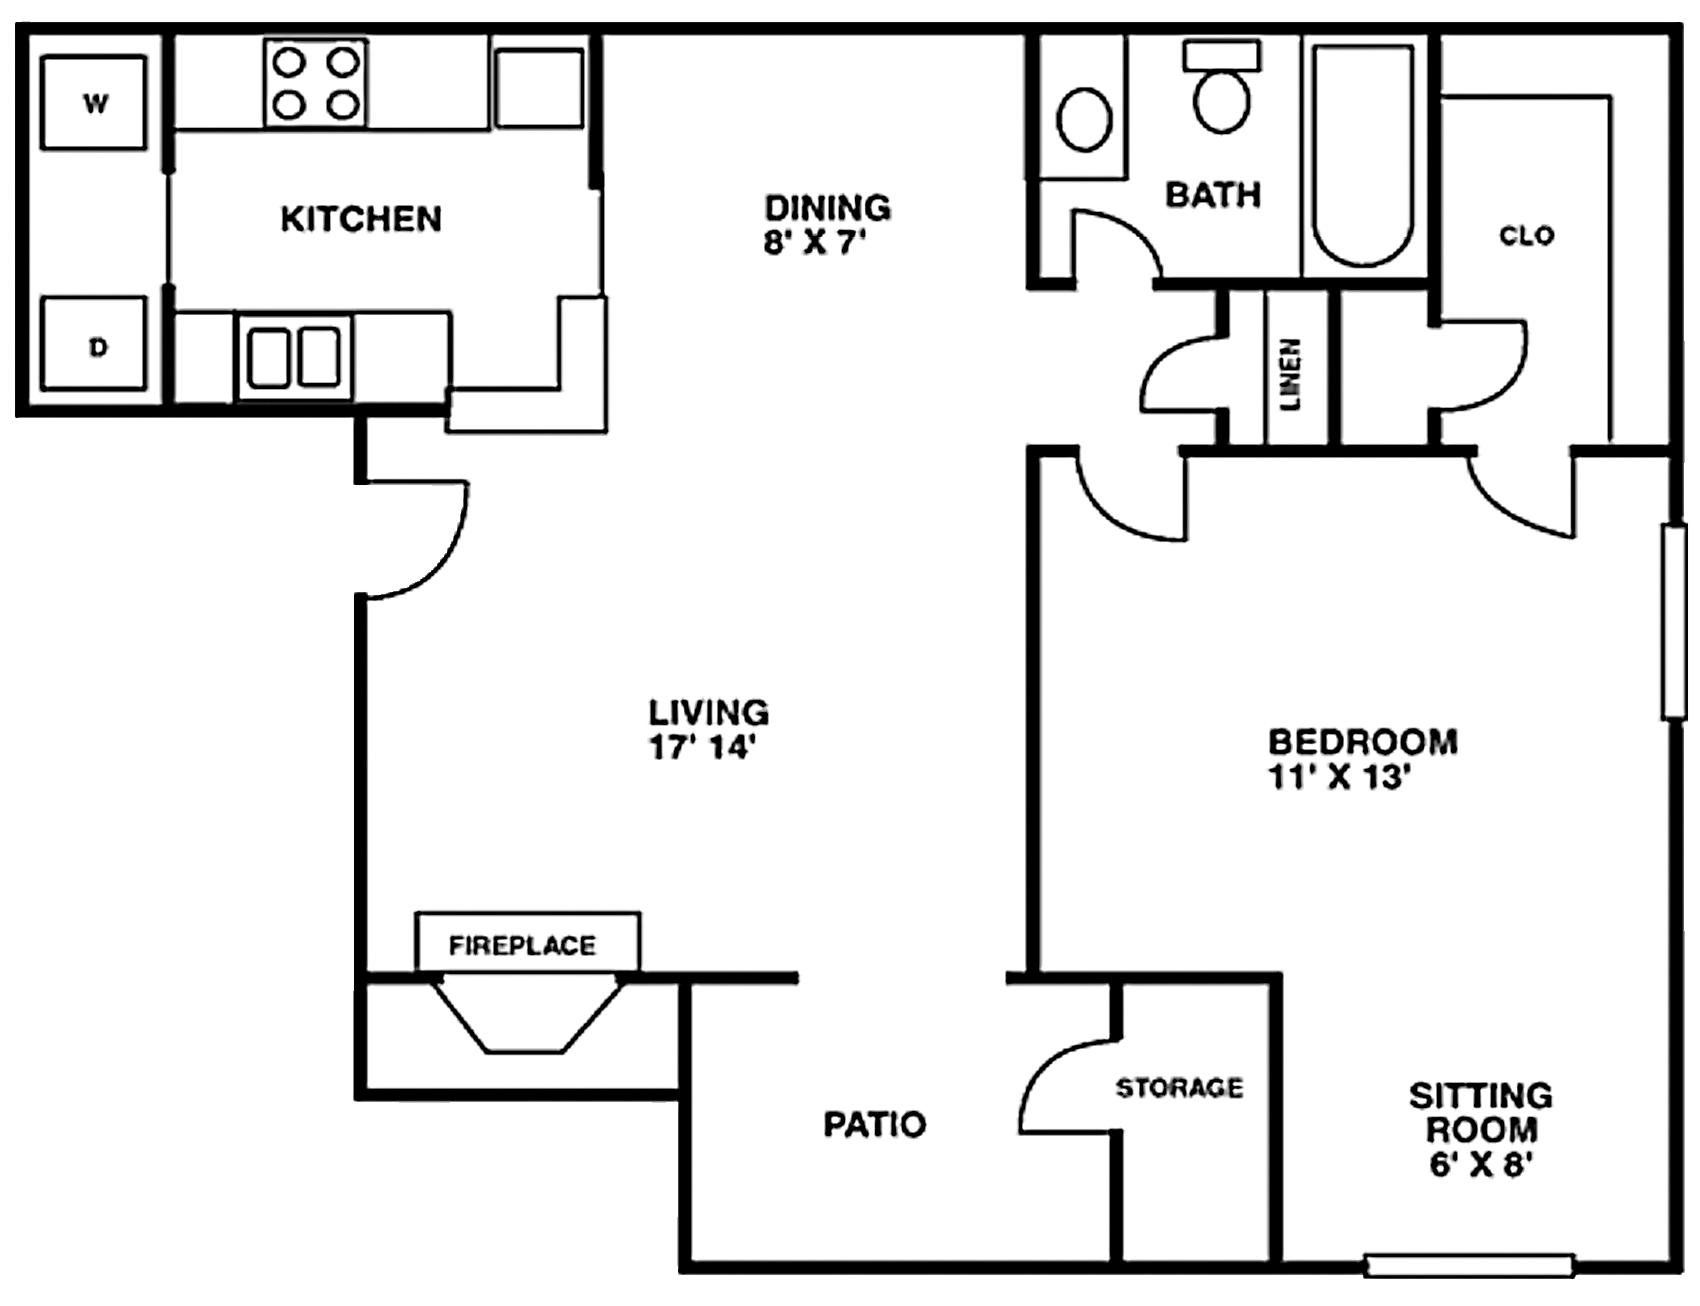 Crescent at Cityview Floor Plans See Our Spacious